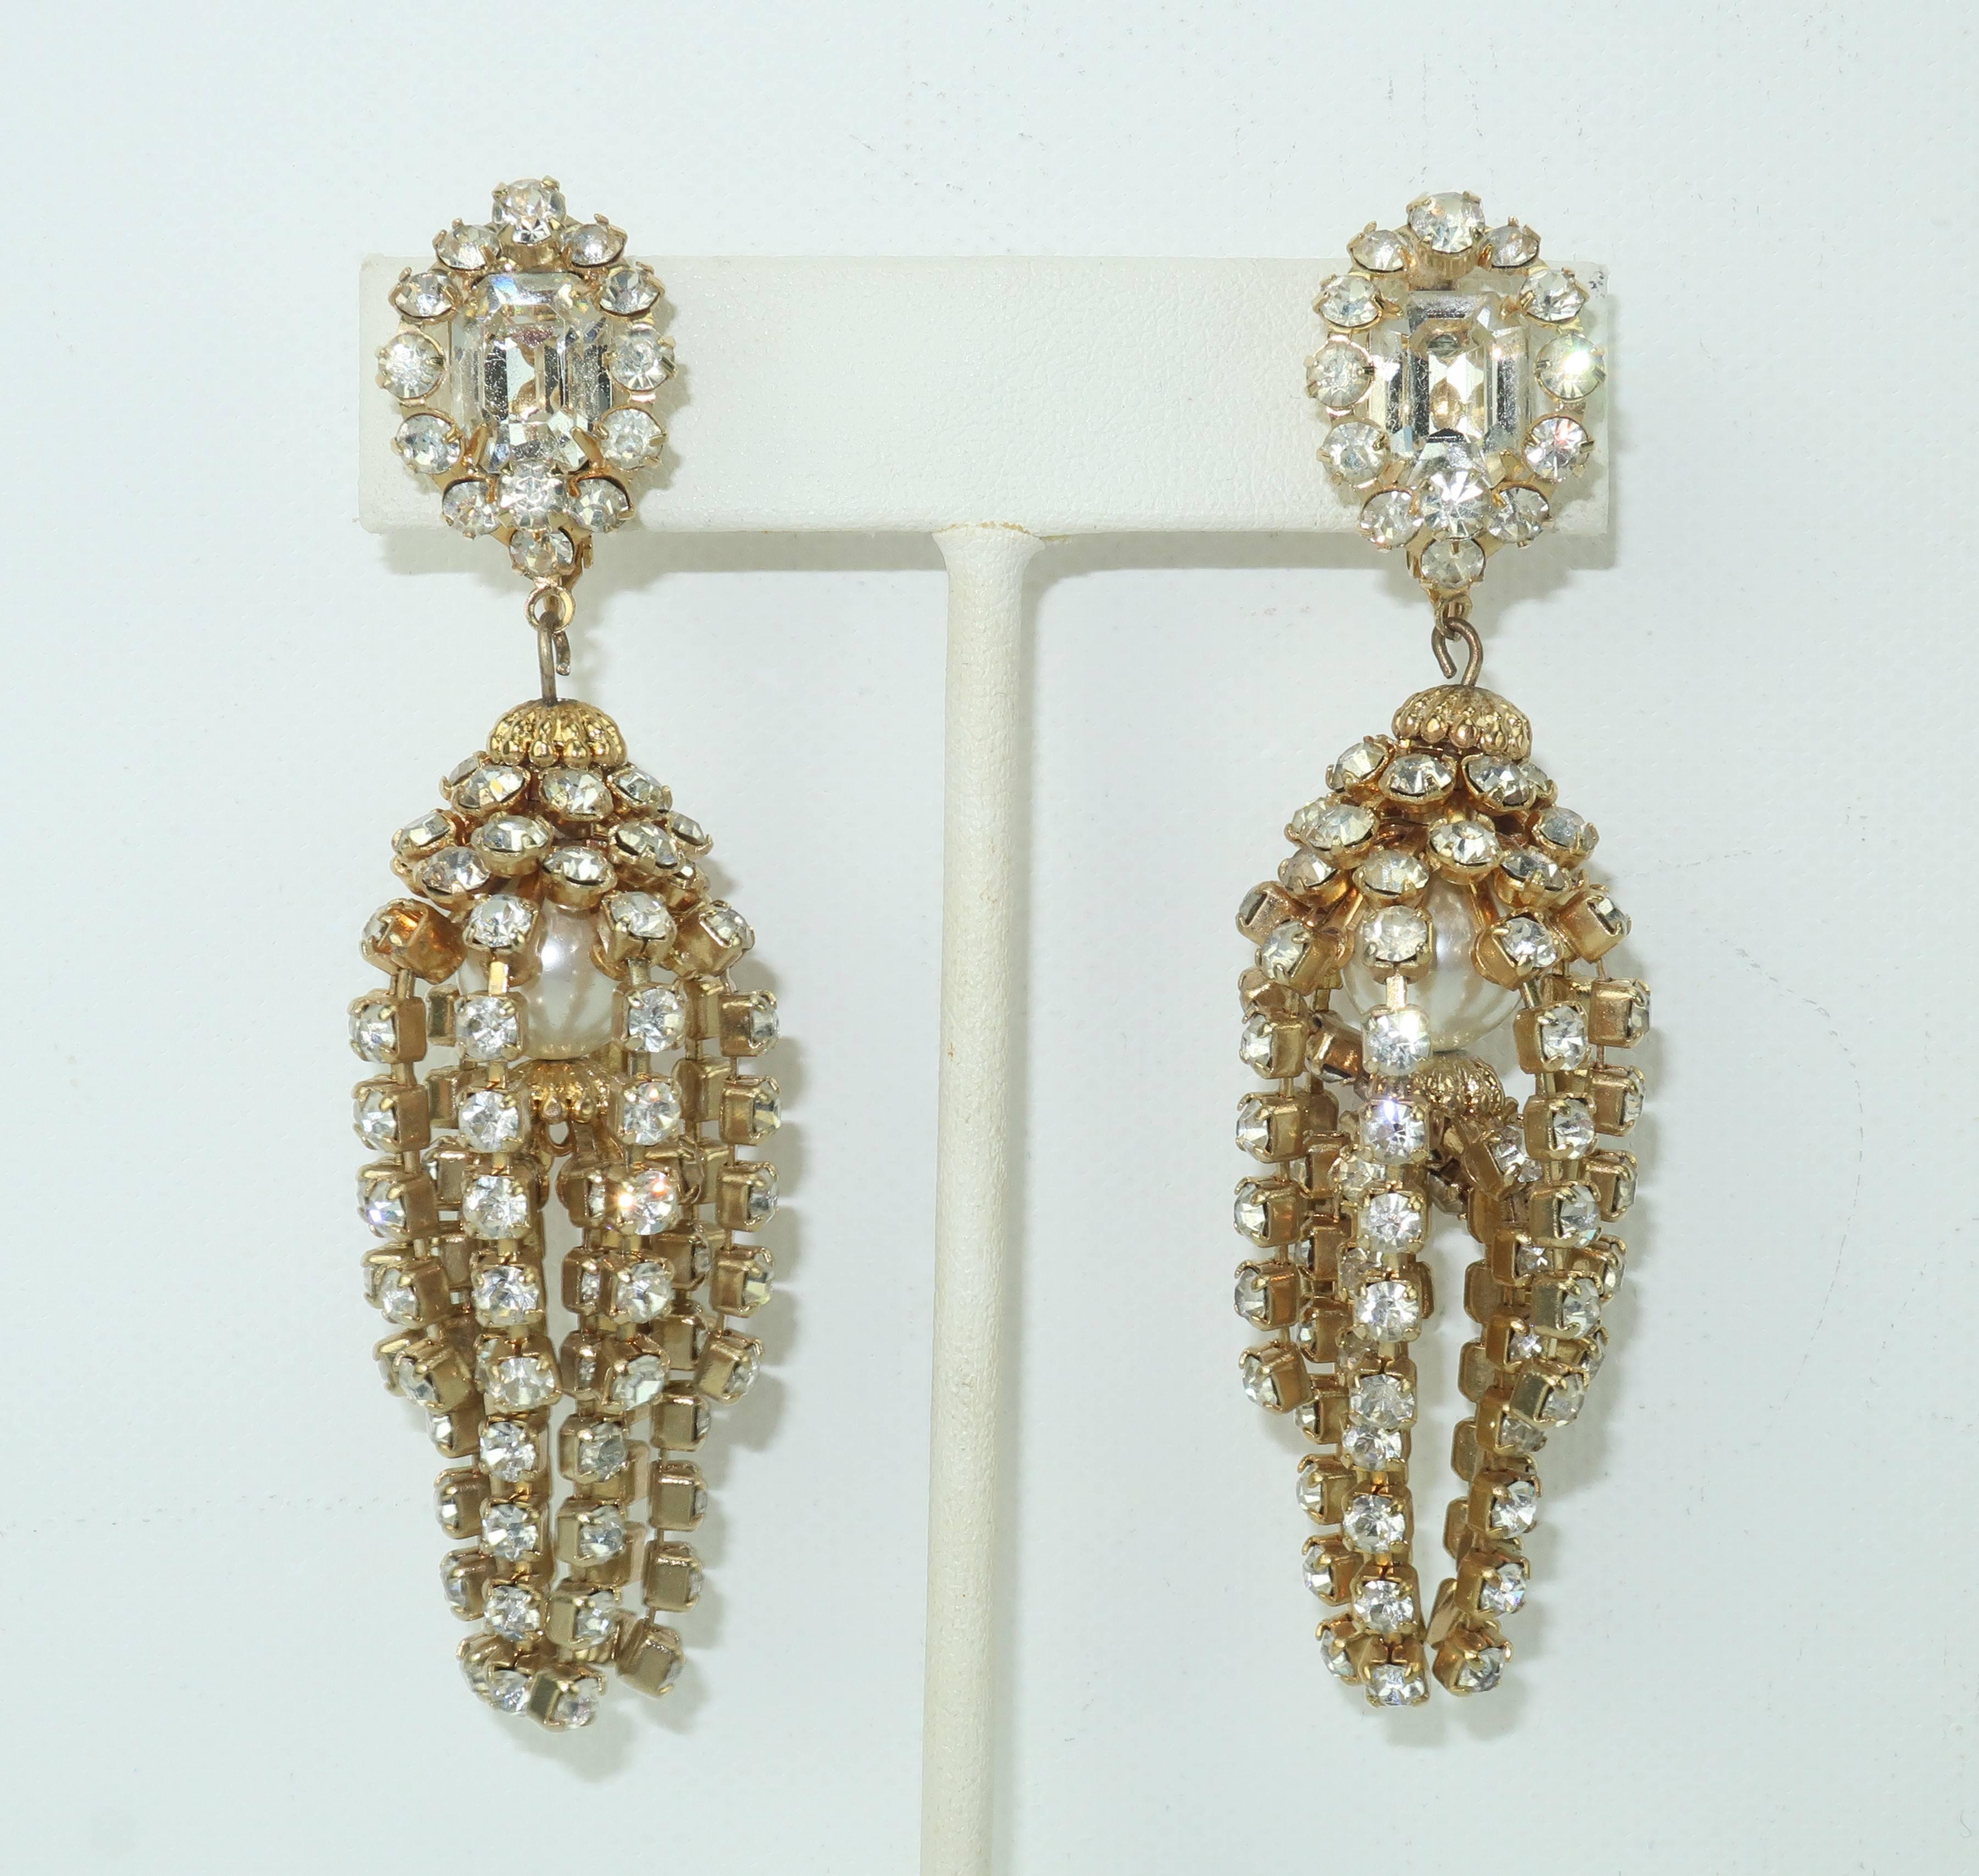 Chandelier earrings can transform your look ... especially when they actually look like miniature chandeliers!  These ultra glamorous clip on earrings are created by two tiers of rhinestone chains dangling from a squared rhinestone base.  The center